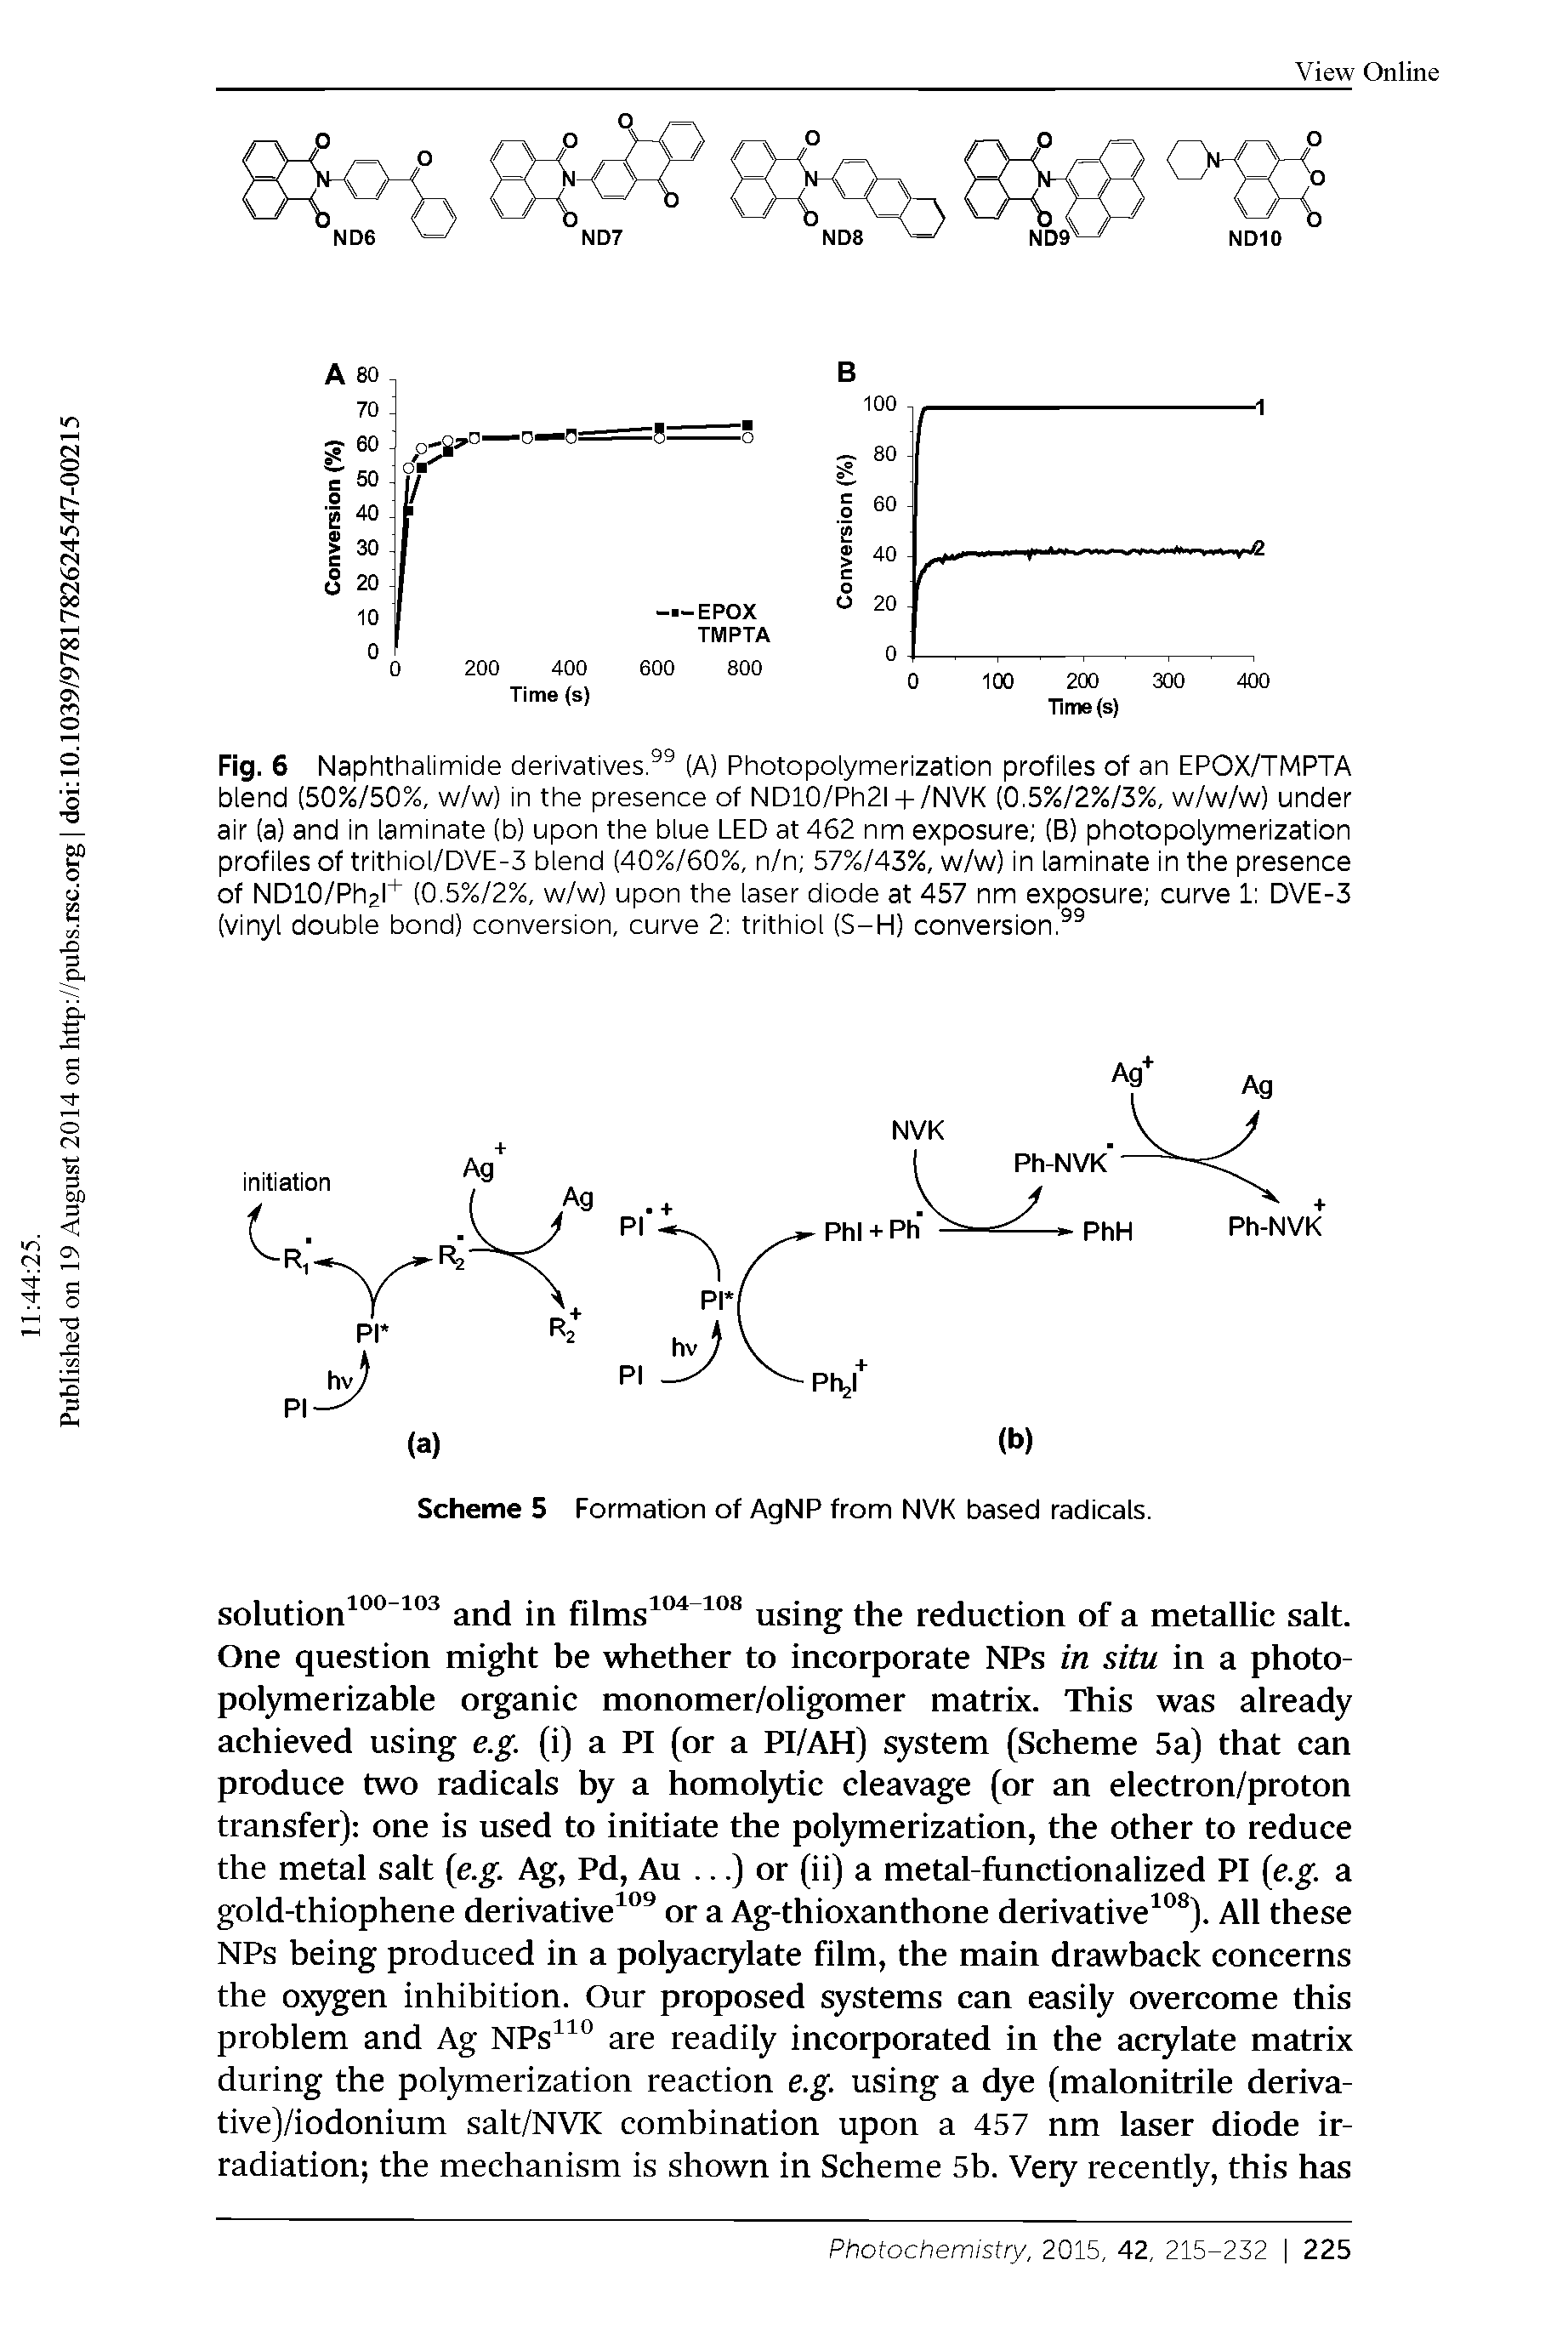 Fig. 6 Naphthalimide derivatives. (A) Photopolymerization profiles of an EPOX/TMPTA blend (50%/50%, w/w) in the presence of ND10/Ph2l + /NVK (0.5%/2%/3%, w/w/w) under air (a) and in laminate (b) upon the blue LED at 462 nm exposure (B) photopolymerization profiles of trithiol/DVE-3 blend (40%/60%, n/n 57%/43%, w/w) in laminate in the presence of NDIO/Phal (0.5%/2%, w/w) upon the laser diode at 457 nm exposure curve 1 DVE-3 (vinyl double bond) conversion, curve 2 trithiol (S-H) conversion...